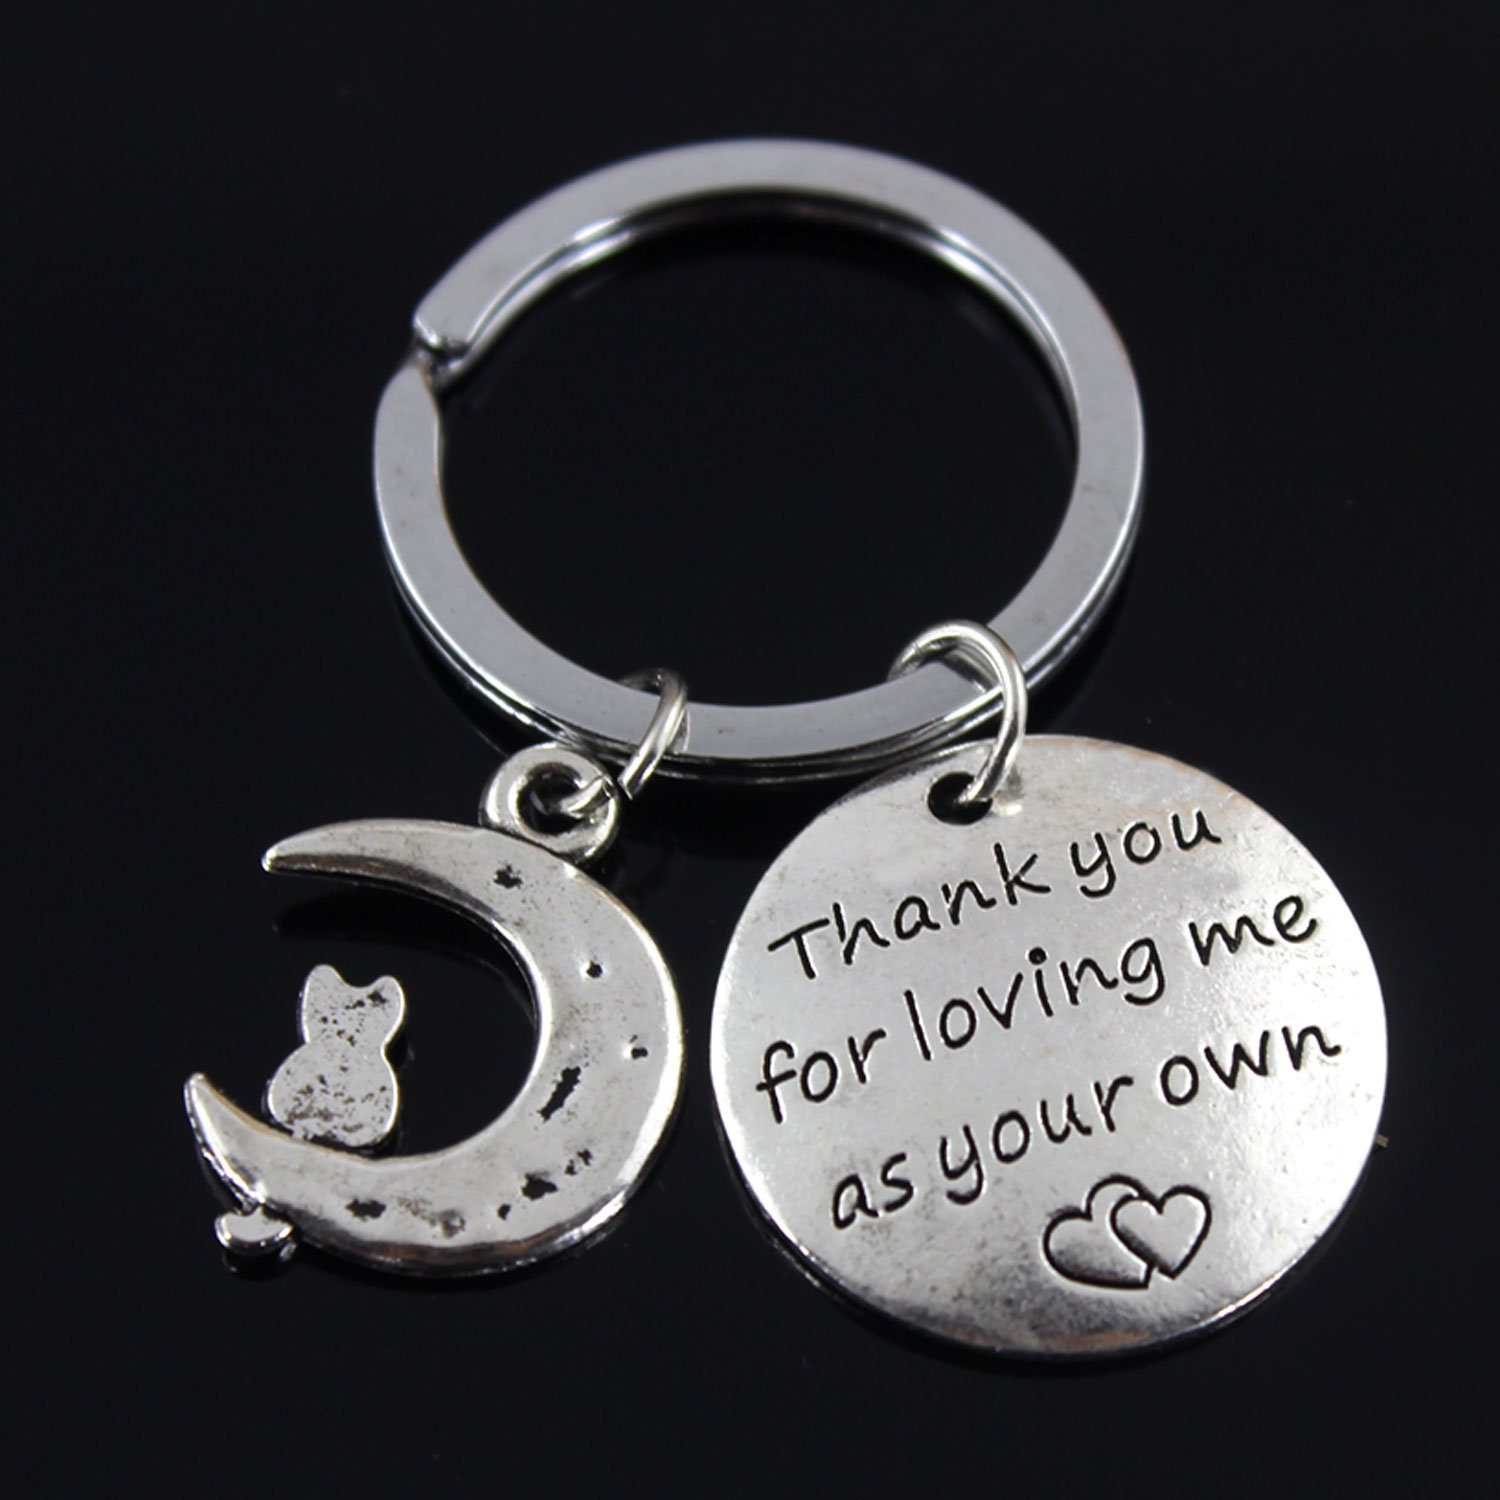 step Mom , Dad Gift, Thank You For Loving Me As Your Own Keychain Guardian Keyring Foster Parents Key Chain, Moon Keychain